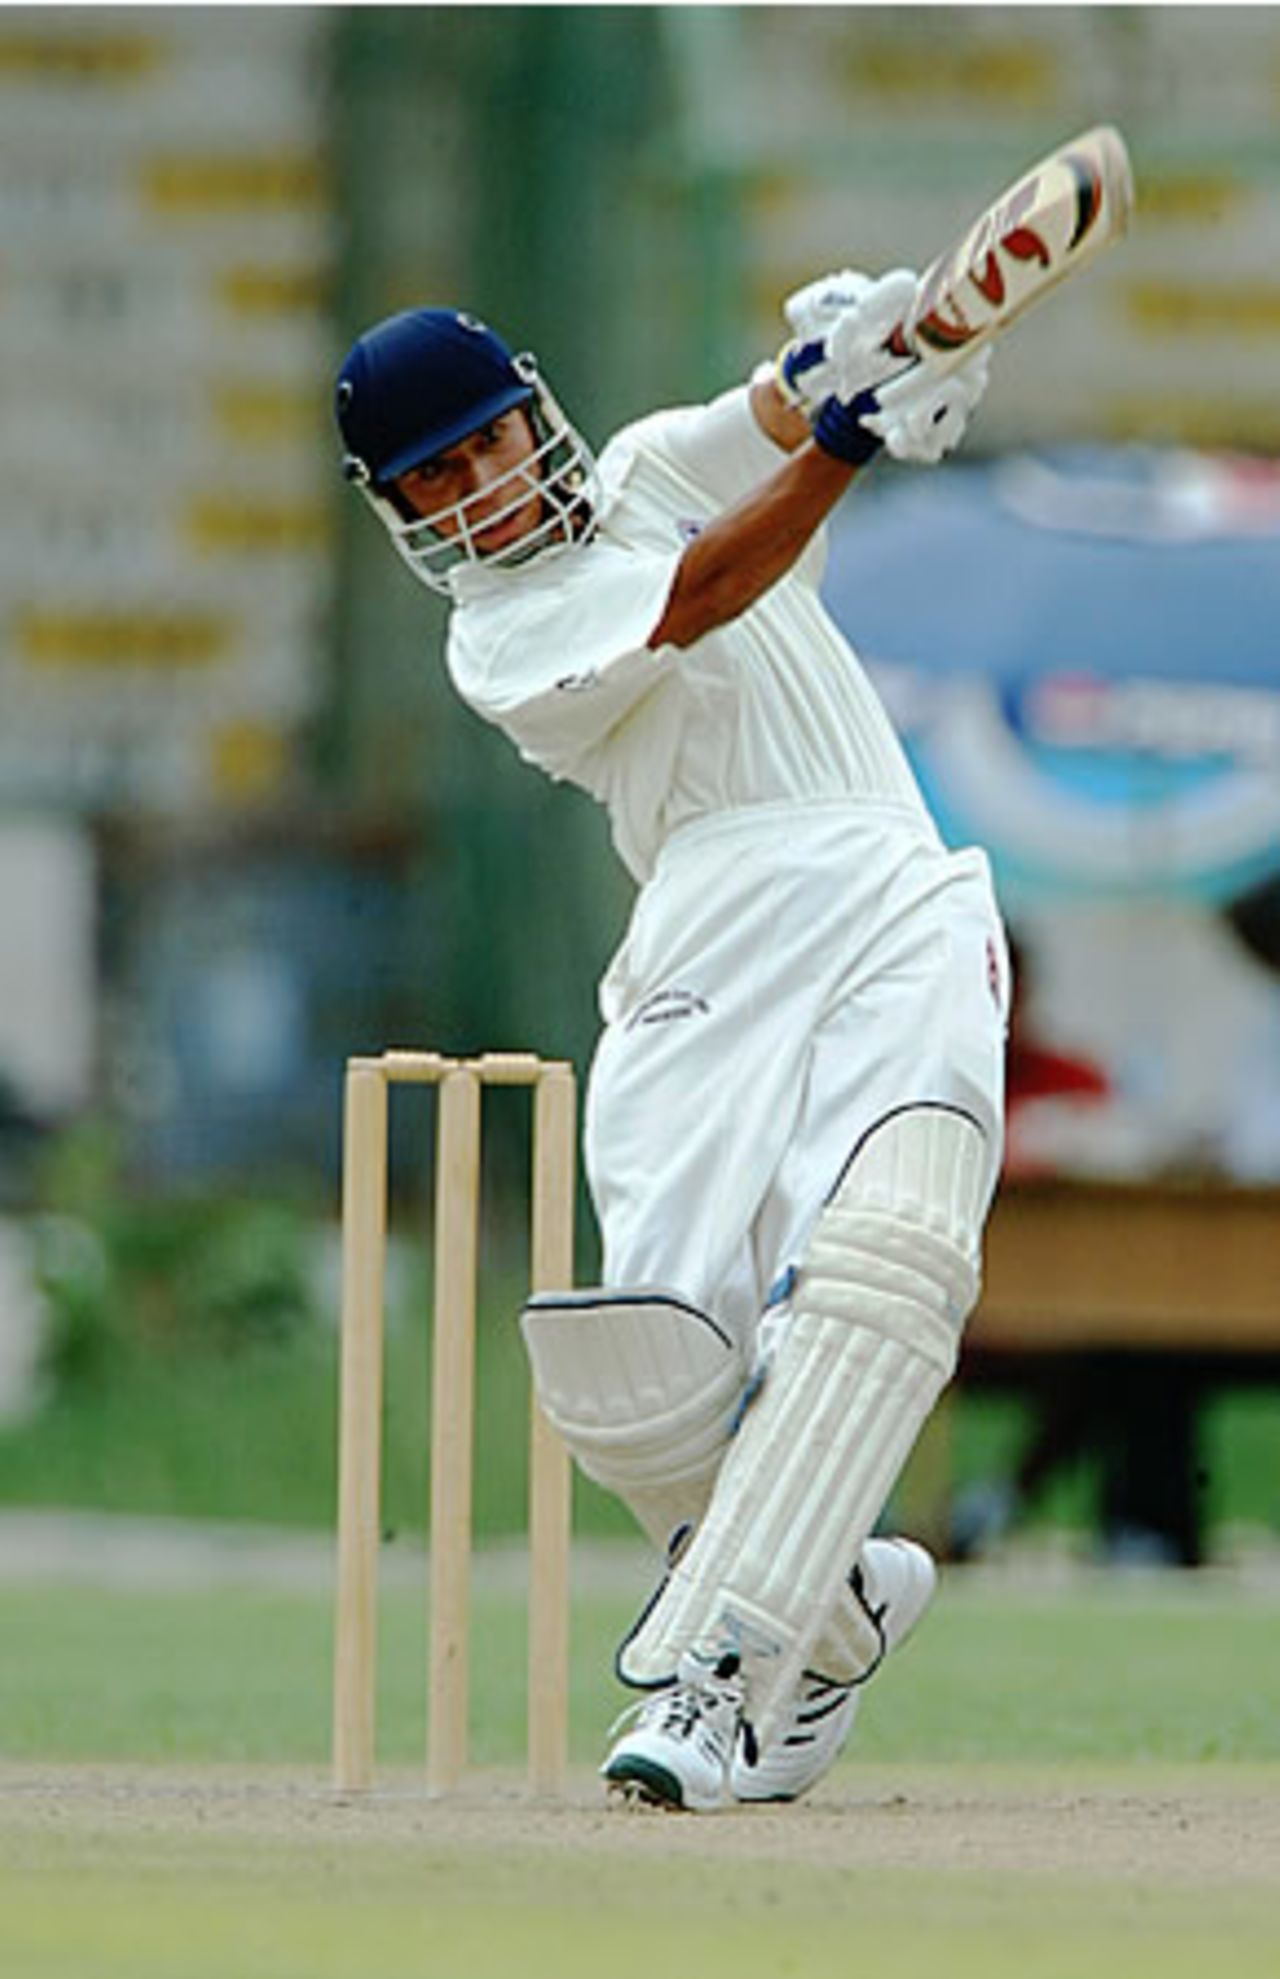 Sharad Veswakar drives for the boundary, Final: Malaysia Under-19s v Nepal Under-19s at National Stadium, Karachi, Youth Asia Cup 2003, 27 July 2003.